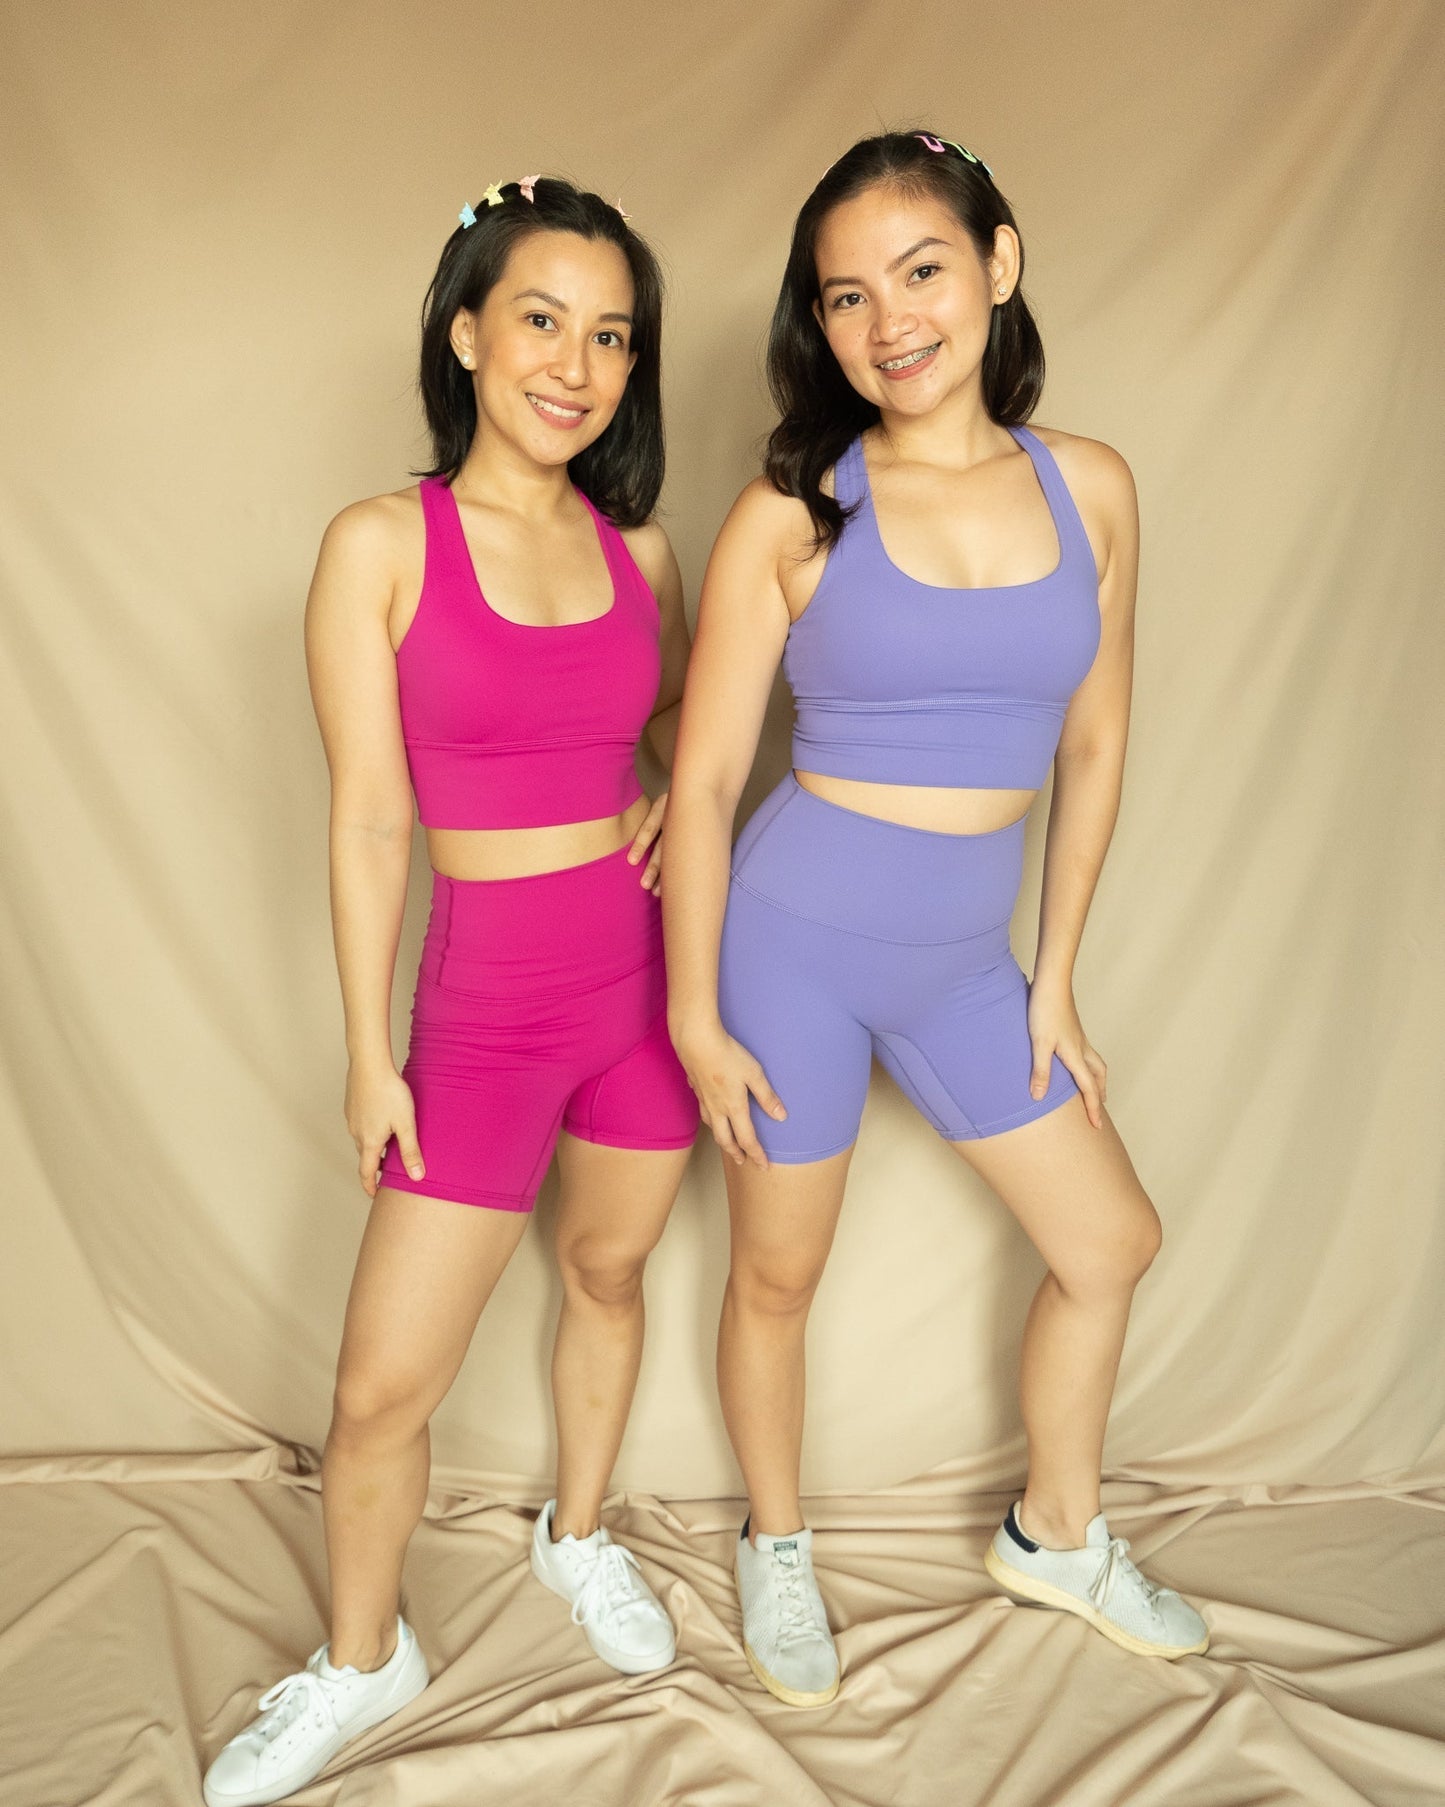 Spice SHORTS SET in Iris Purple - New Day Activewear